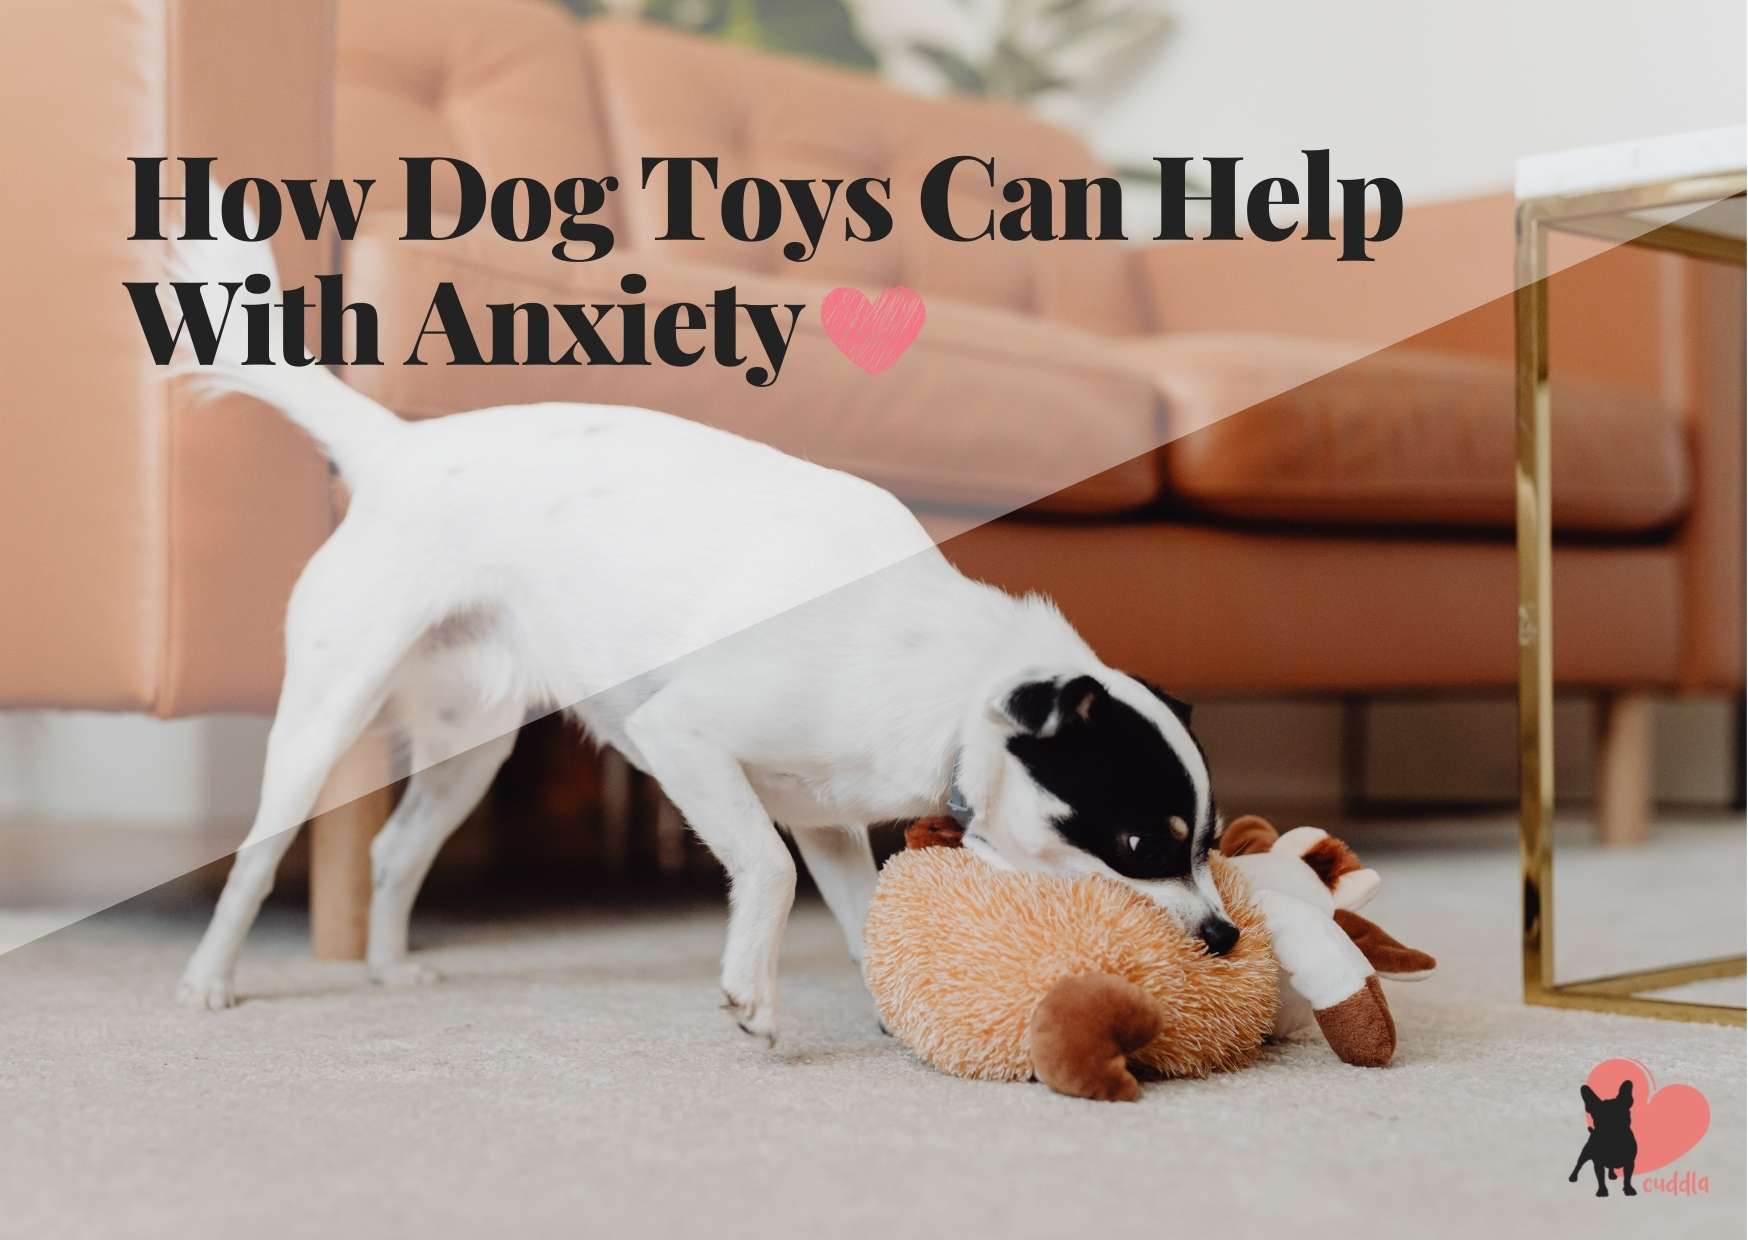 how-dog-toys-can-help-with-anxiety-1